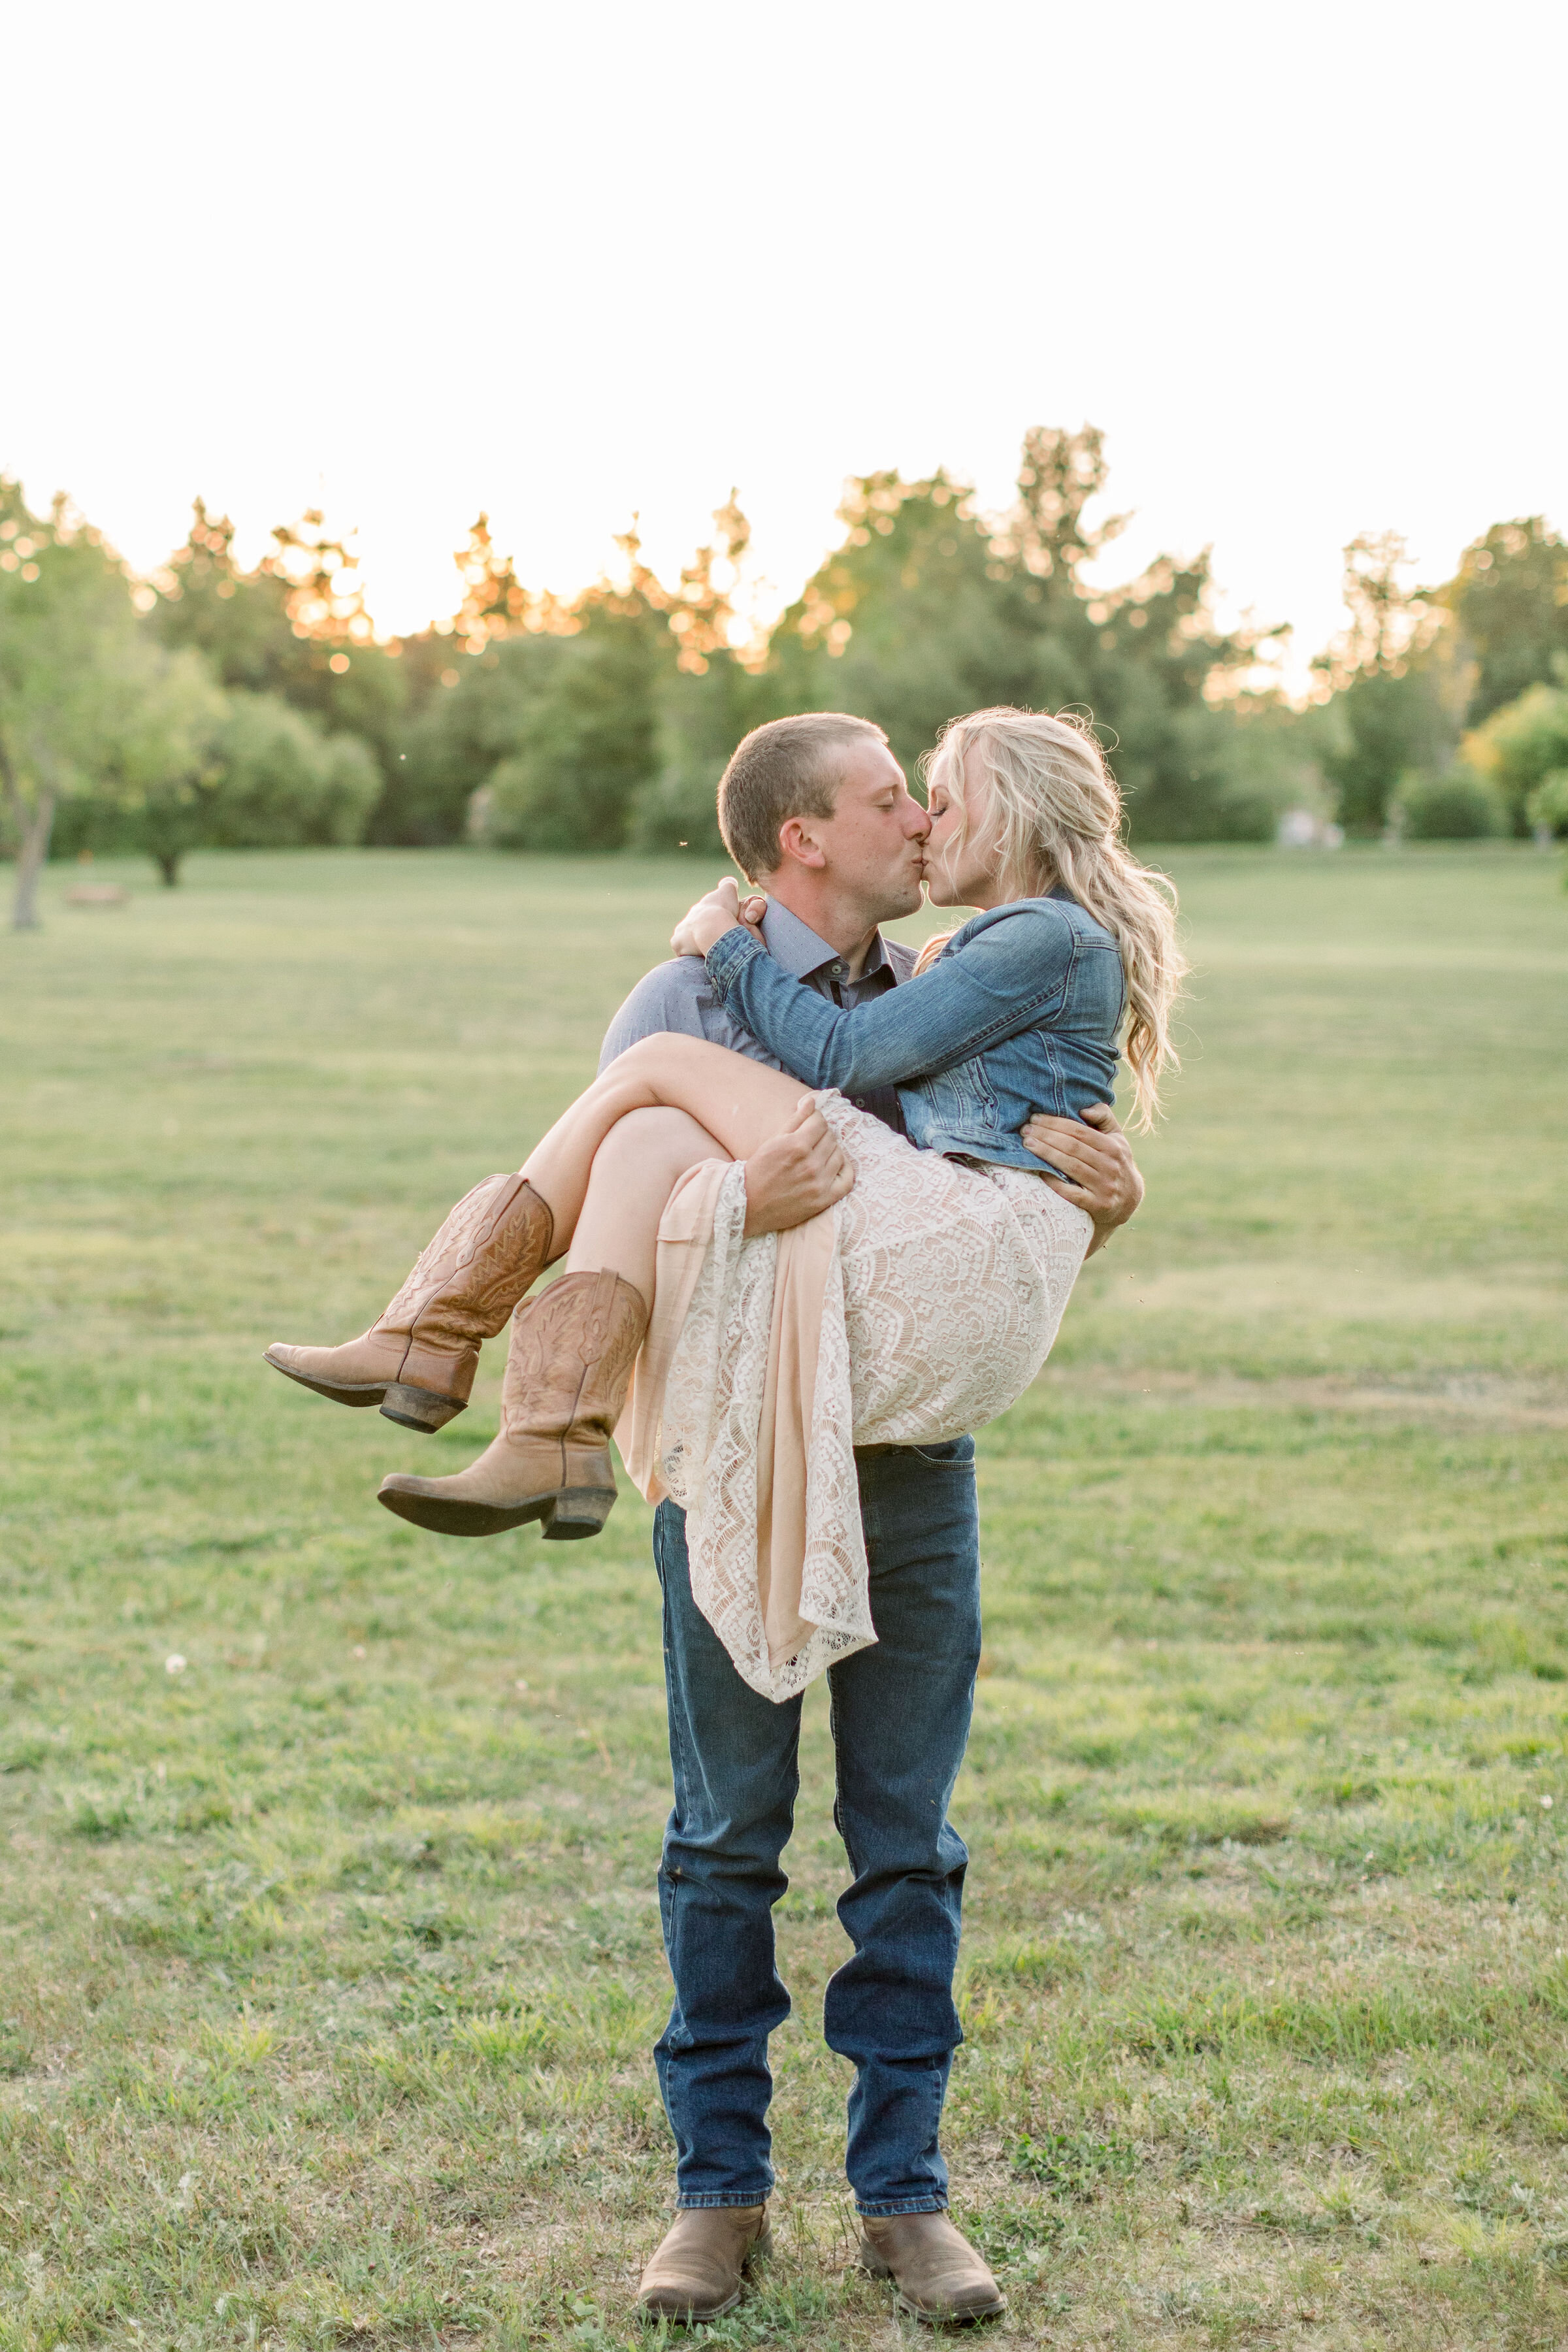  During this romantic southern-styled engagement session in Ottawa, Canada, Chelsea Mason Photography captures this groom carrying his fiancé through a grassy field and kissing her. women's cream lace Dress with cowgirl boots mens work boots #Chelsea